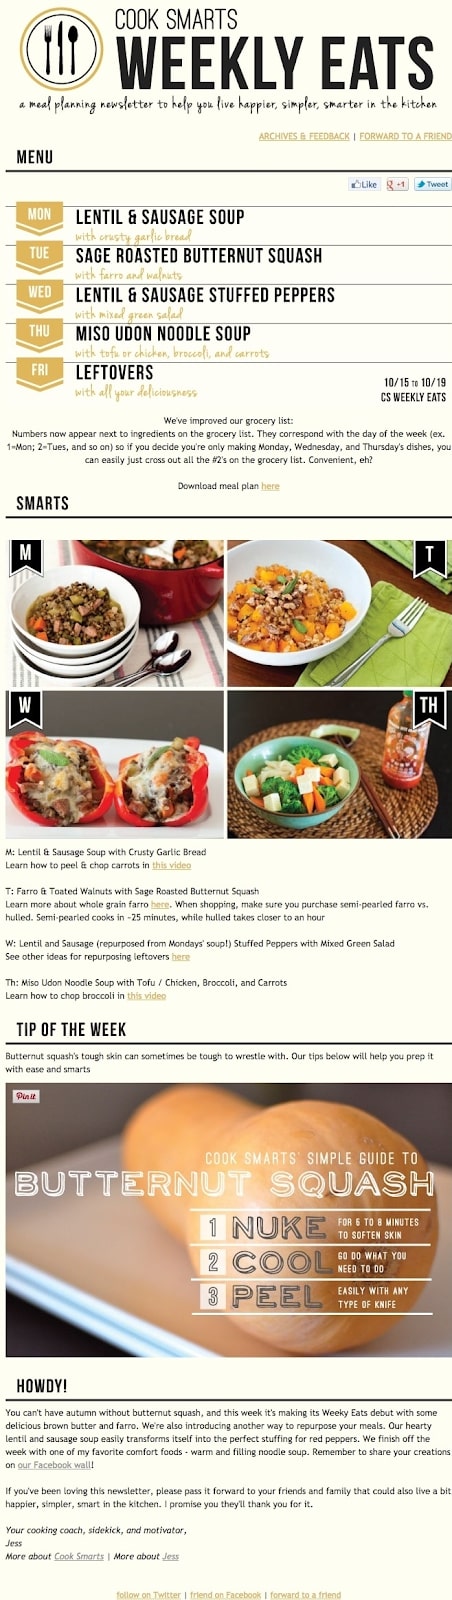 Cooks Smarts' Weekly Eats email